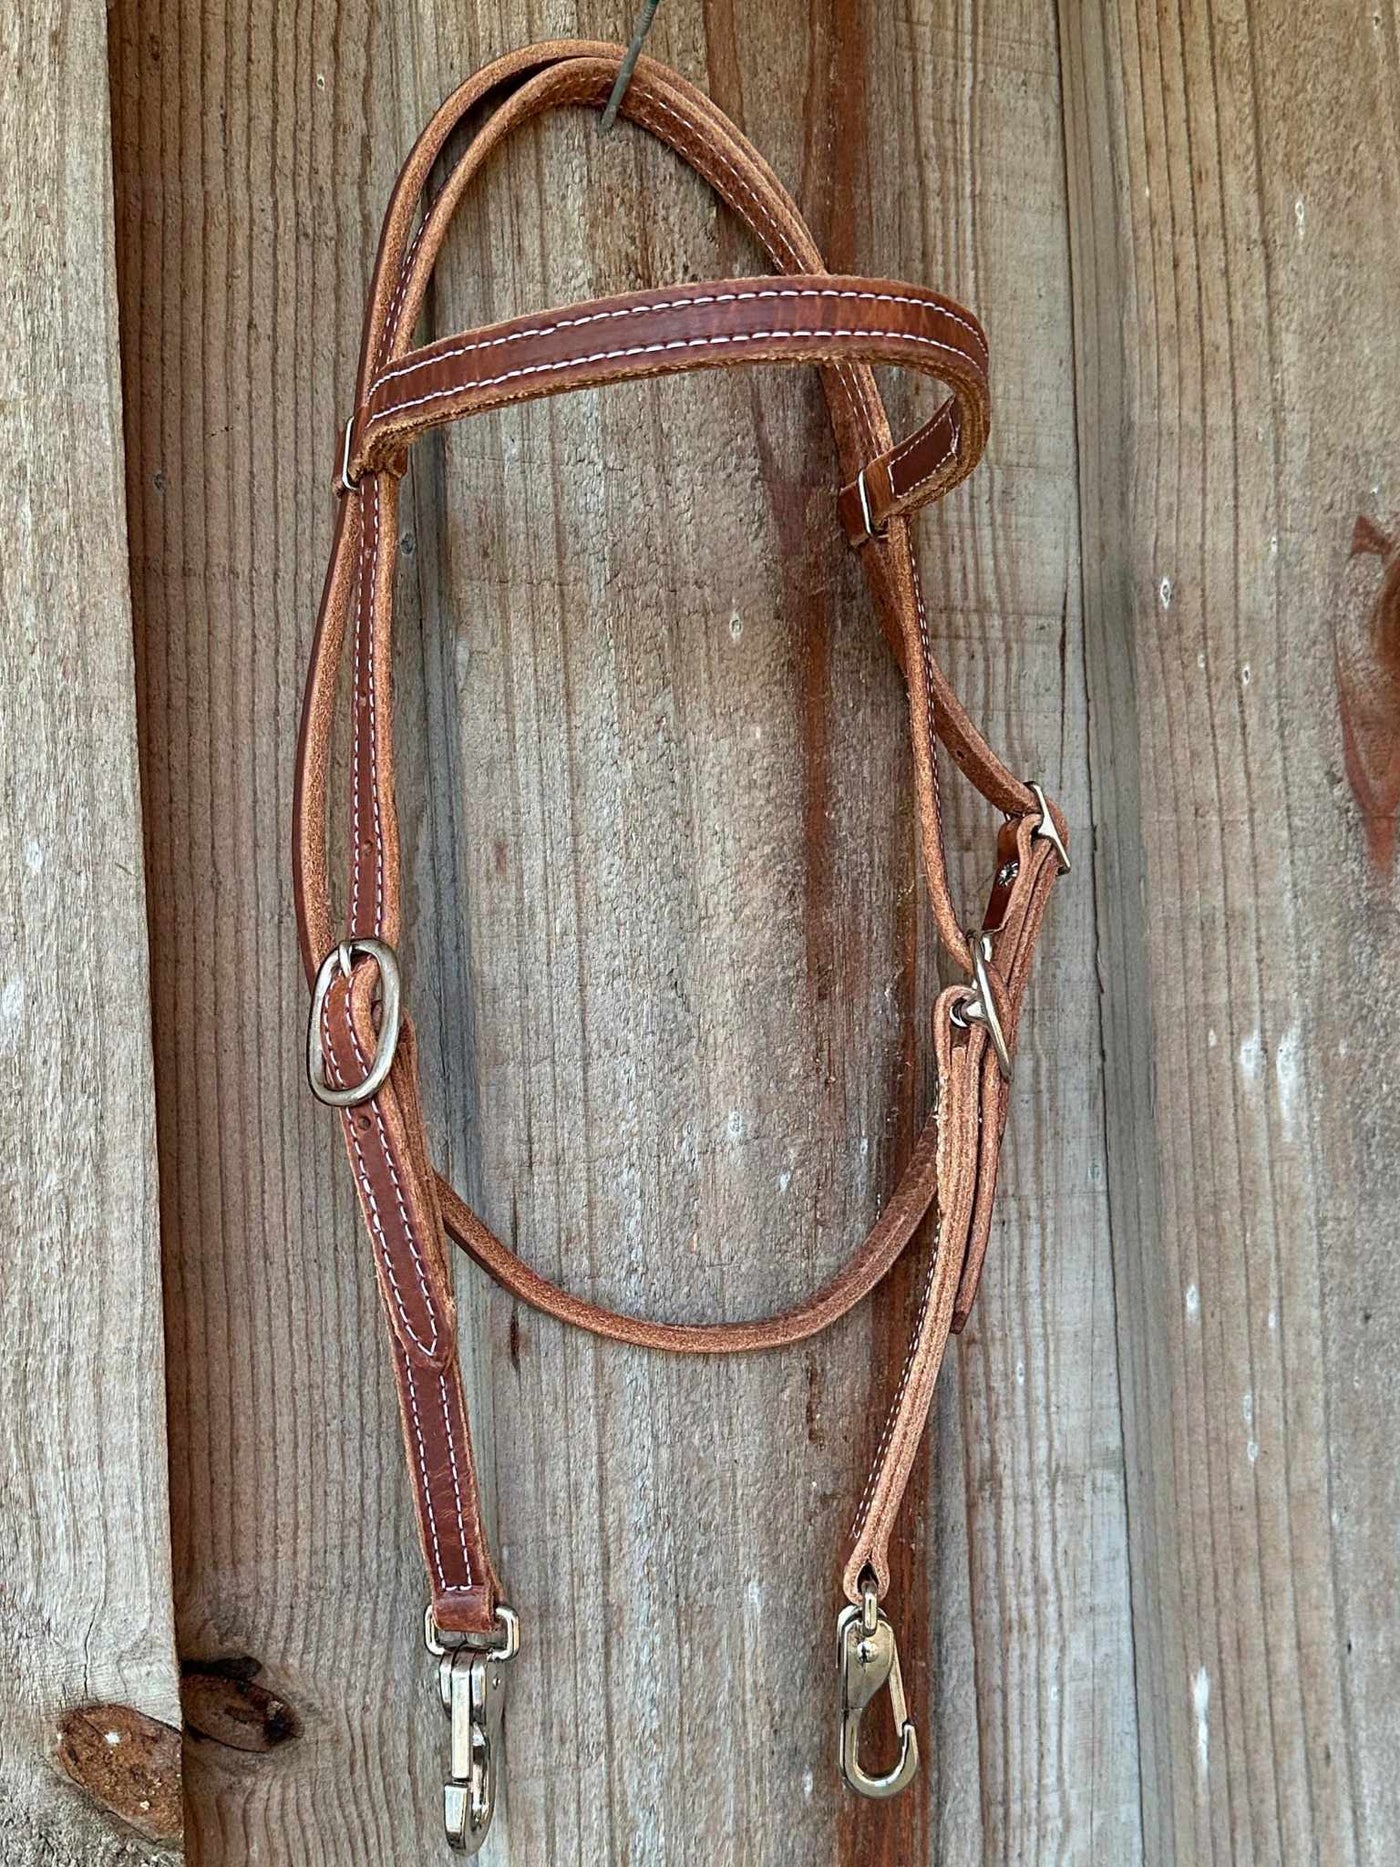 Western Bridle Browband Headstall Harness Leather Quick Snap Ends